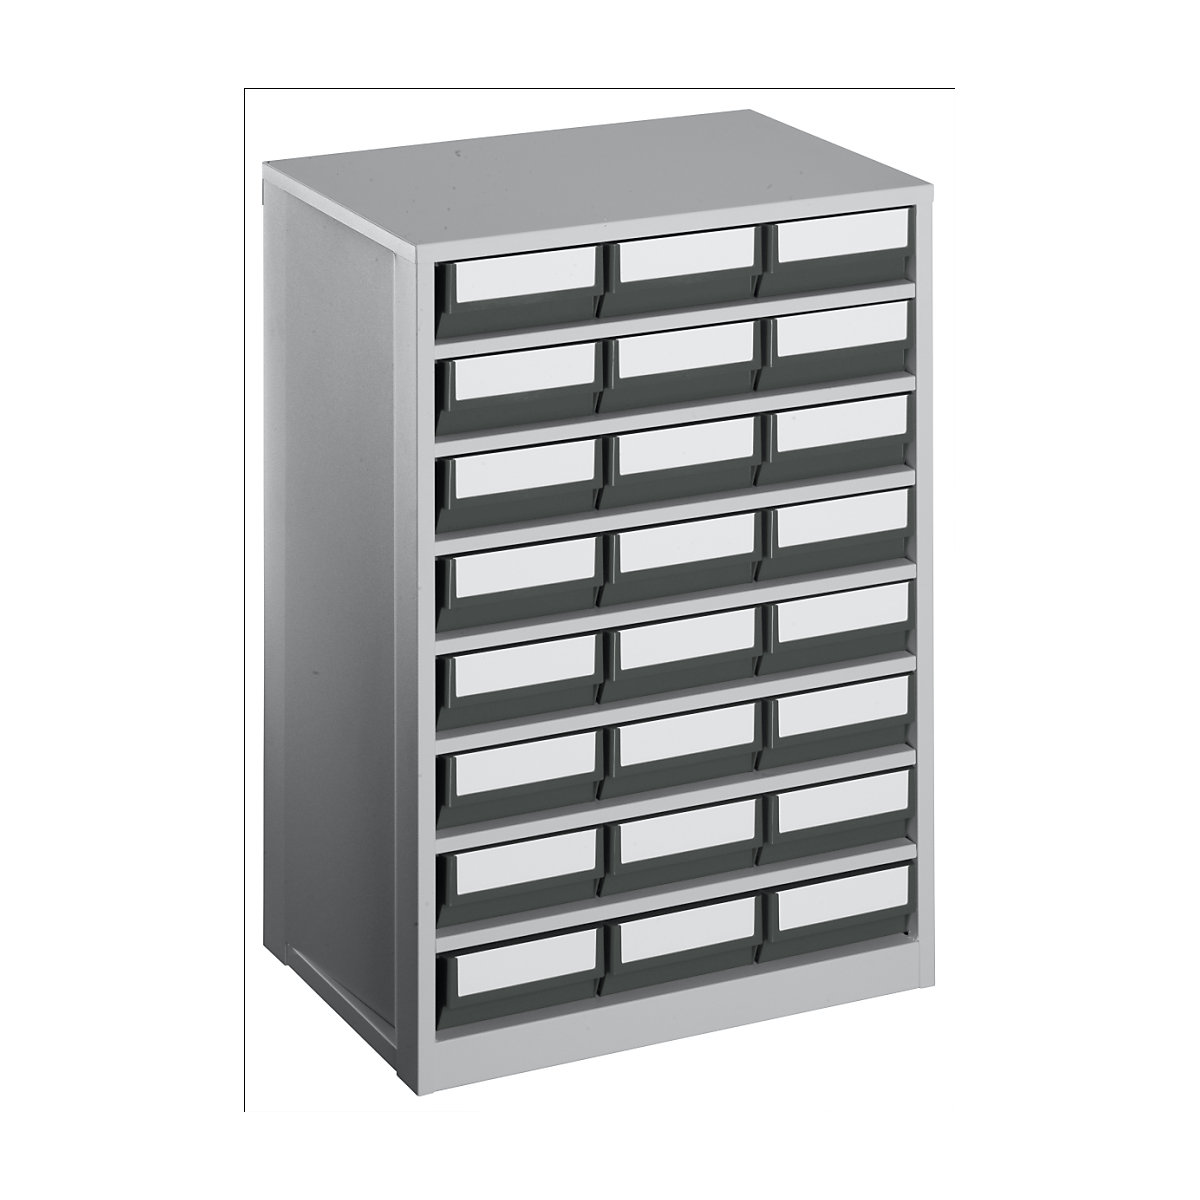 Drawer cabinet, max. housing load 240 kg, HxWxD 862 x 600 x 417 mm, 24 drawers, grey drawers-7